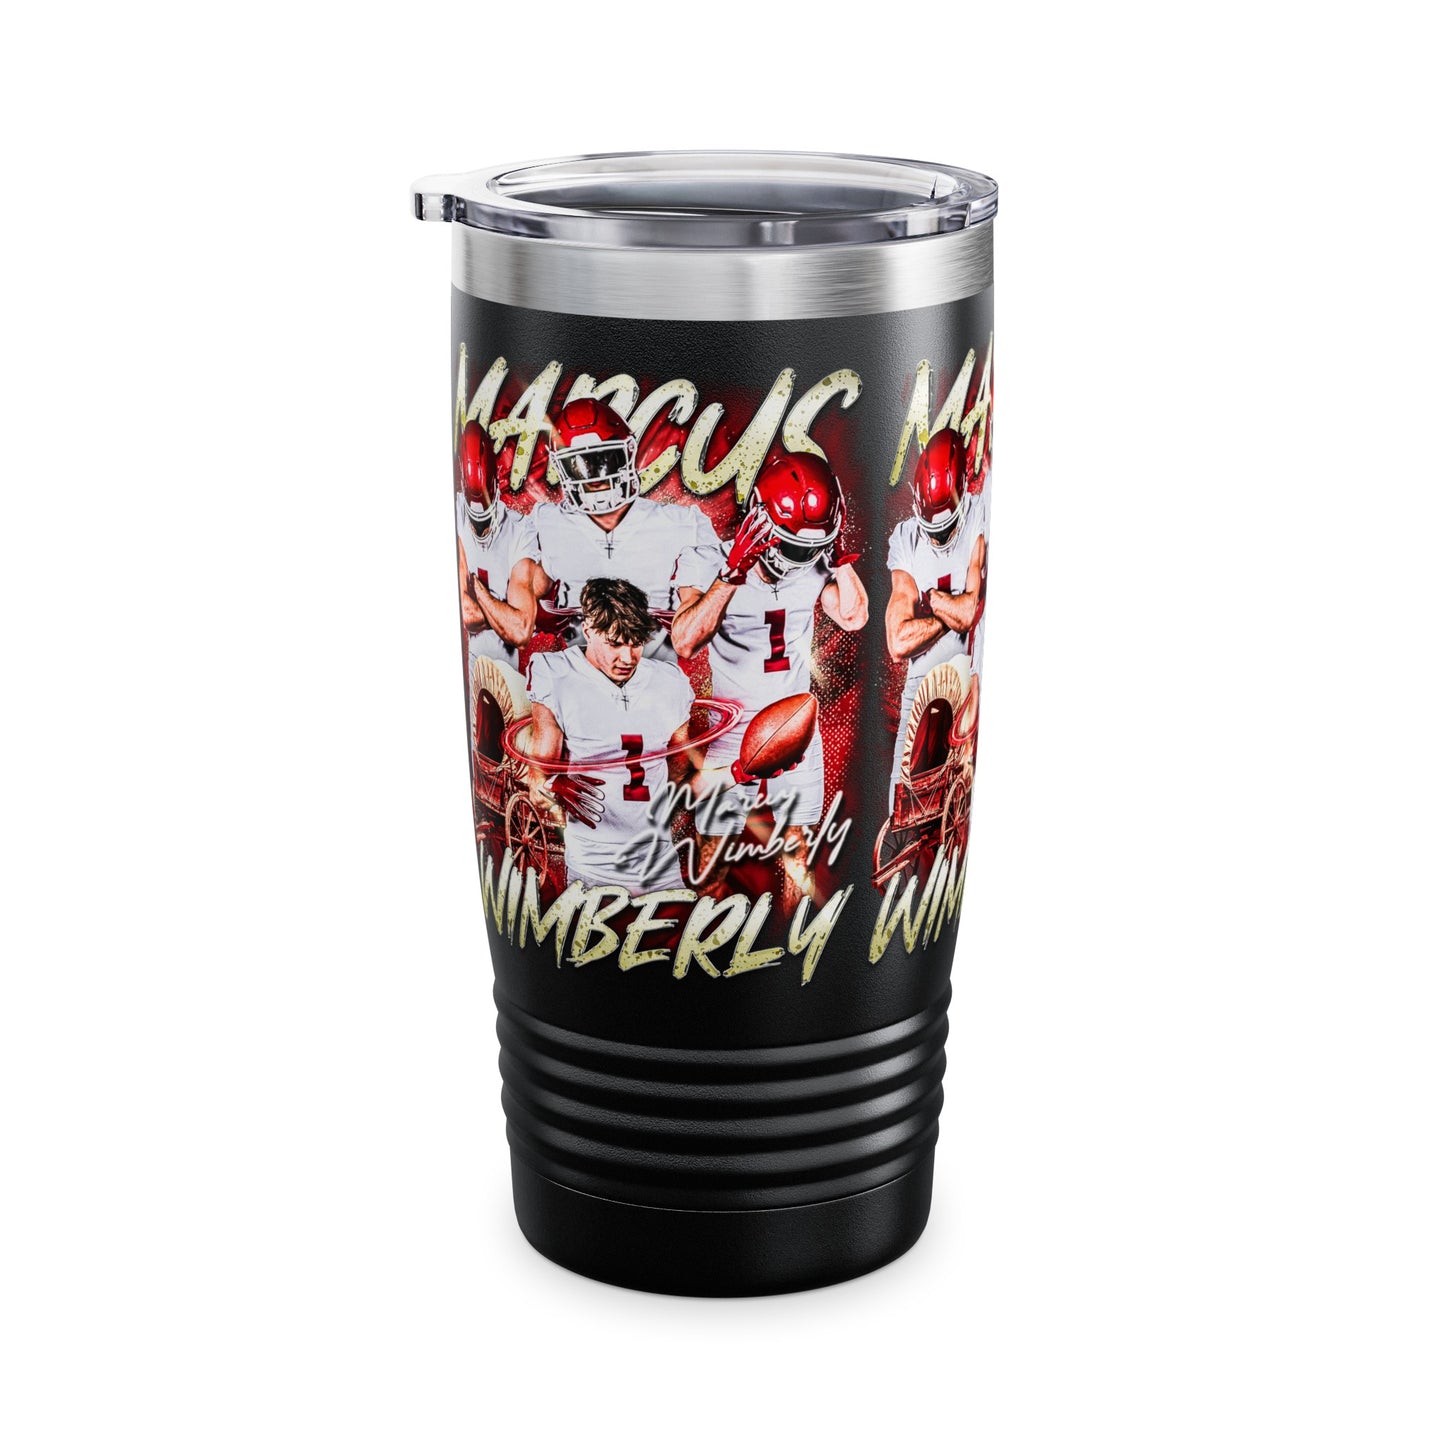 WIMBERLY STAINLESS STEEL TUMBLER